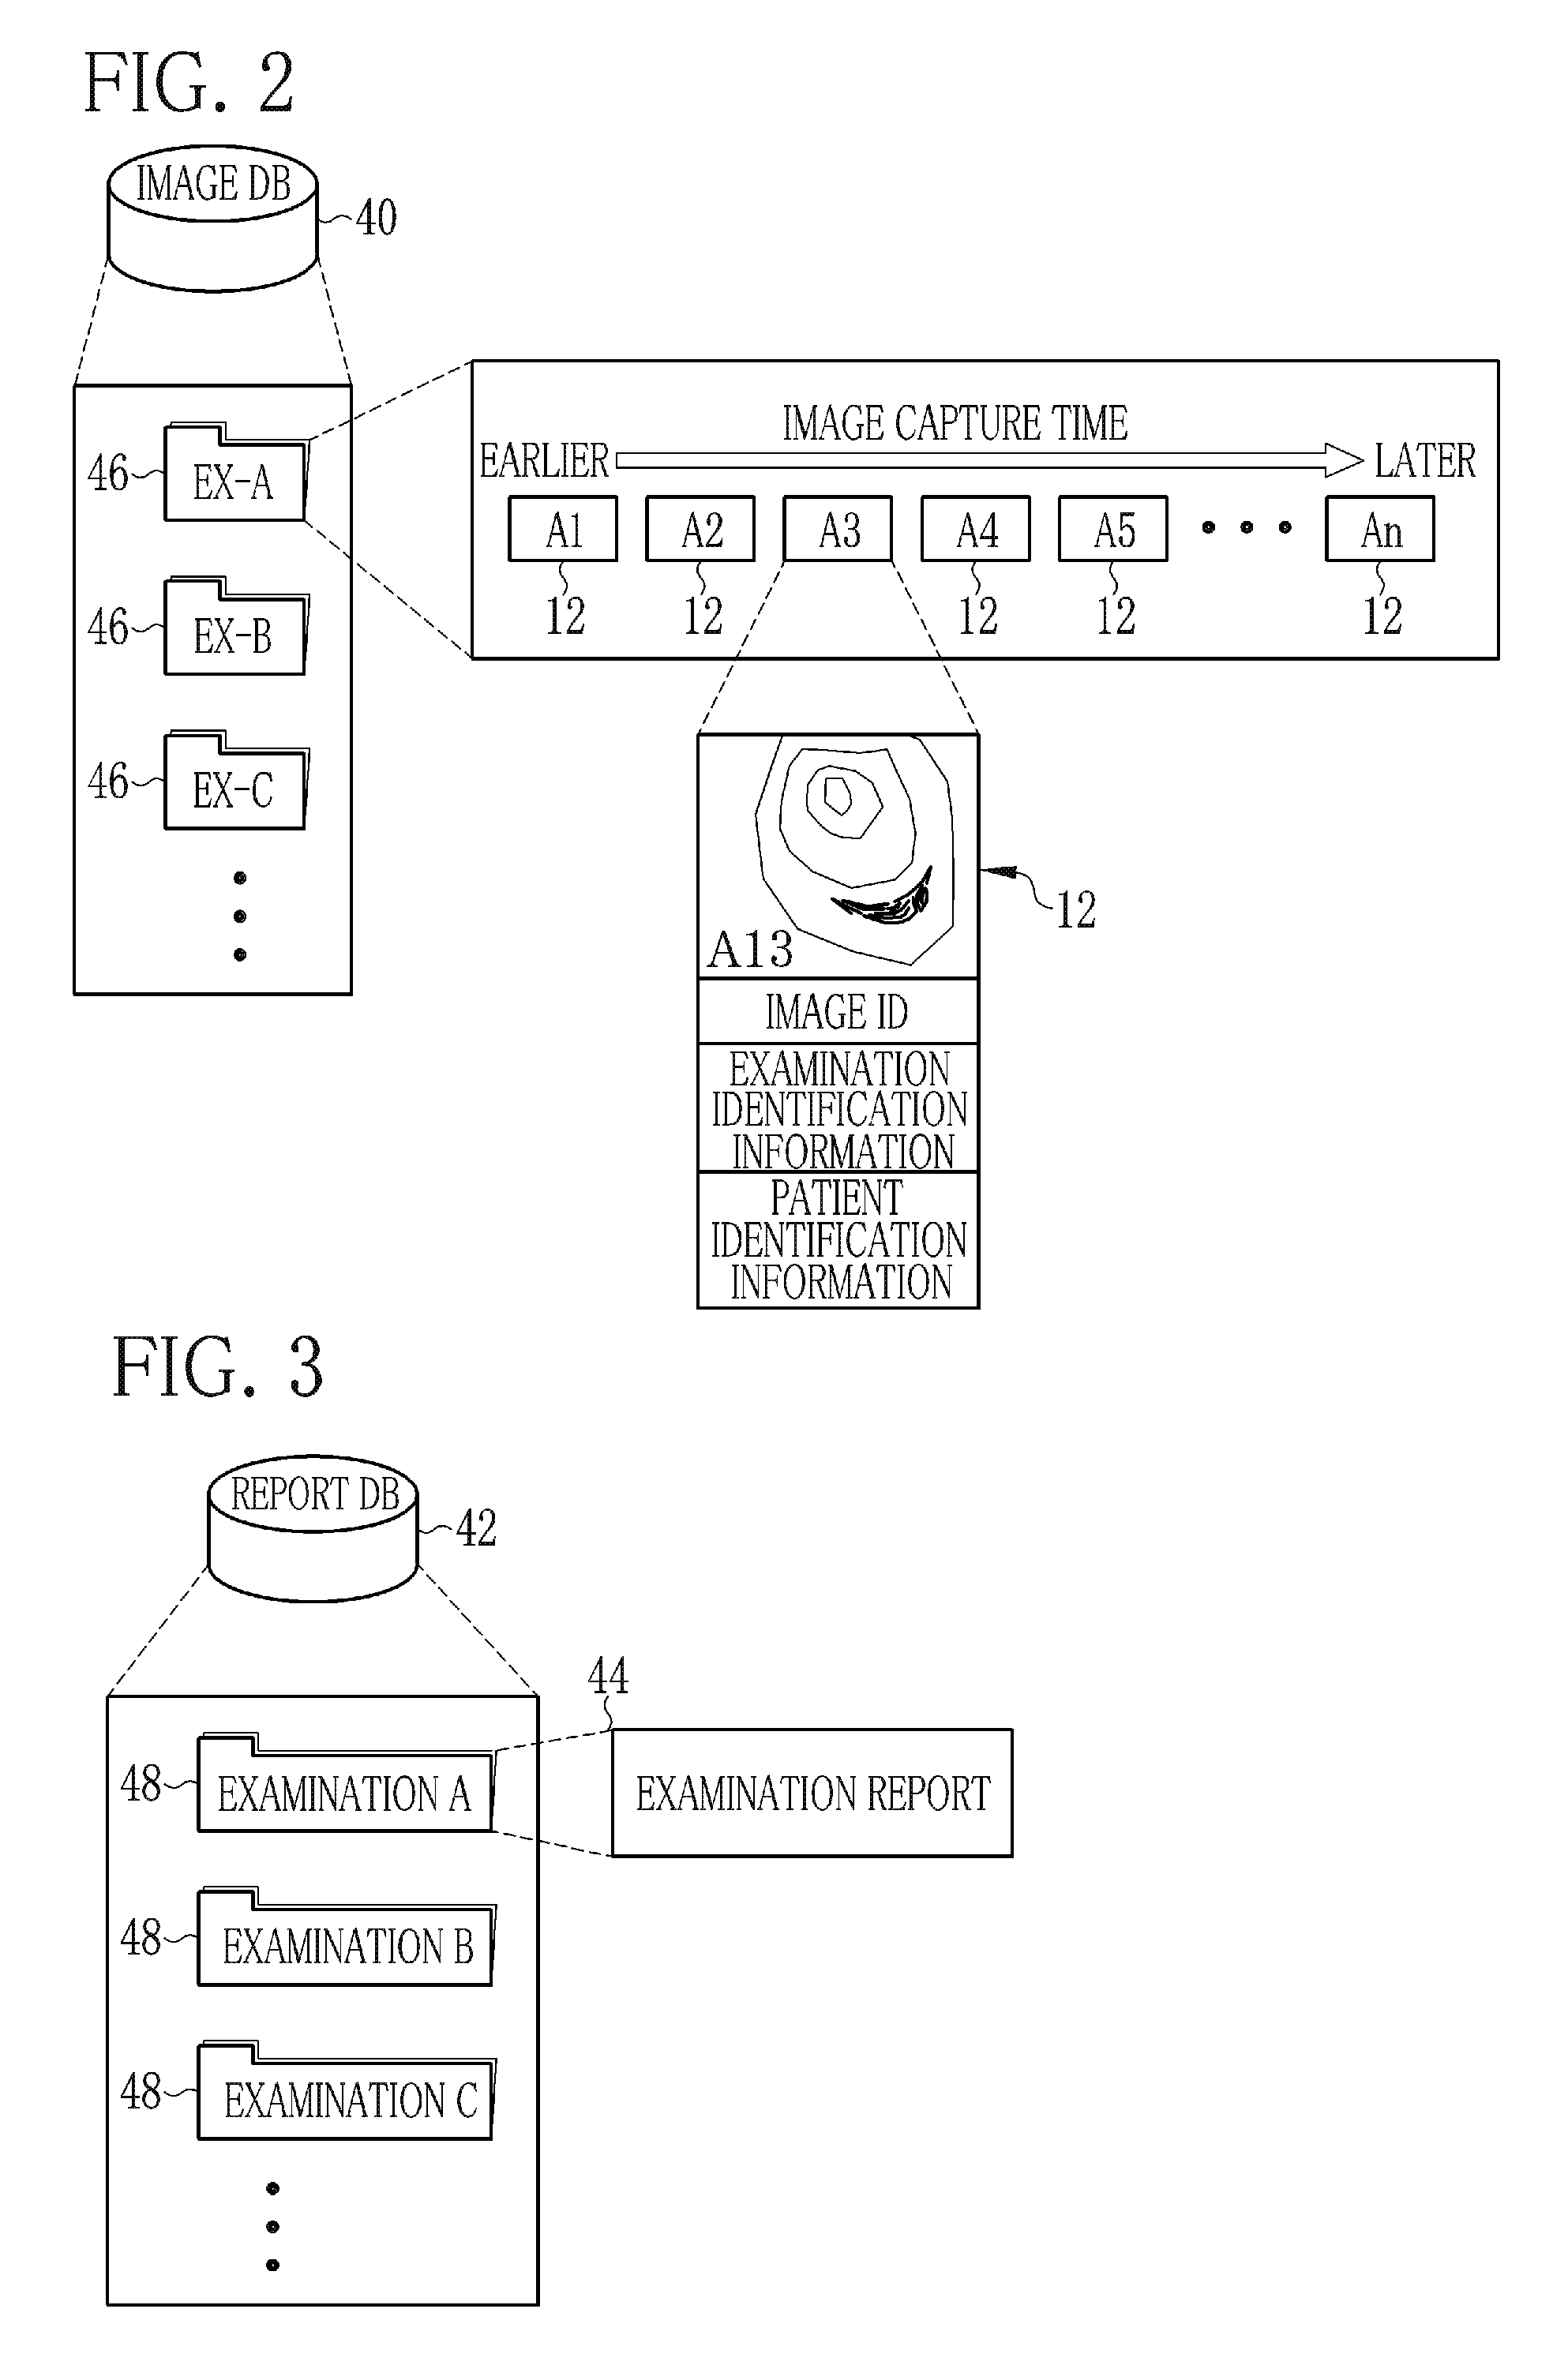 Apparatus, method, and non-transitory computer-readable medium for supporting viewing examination images